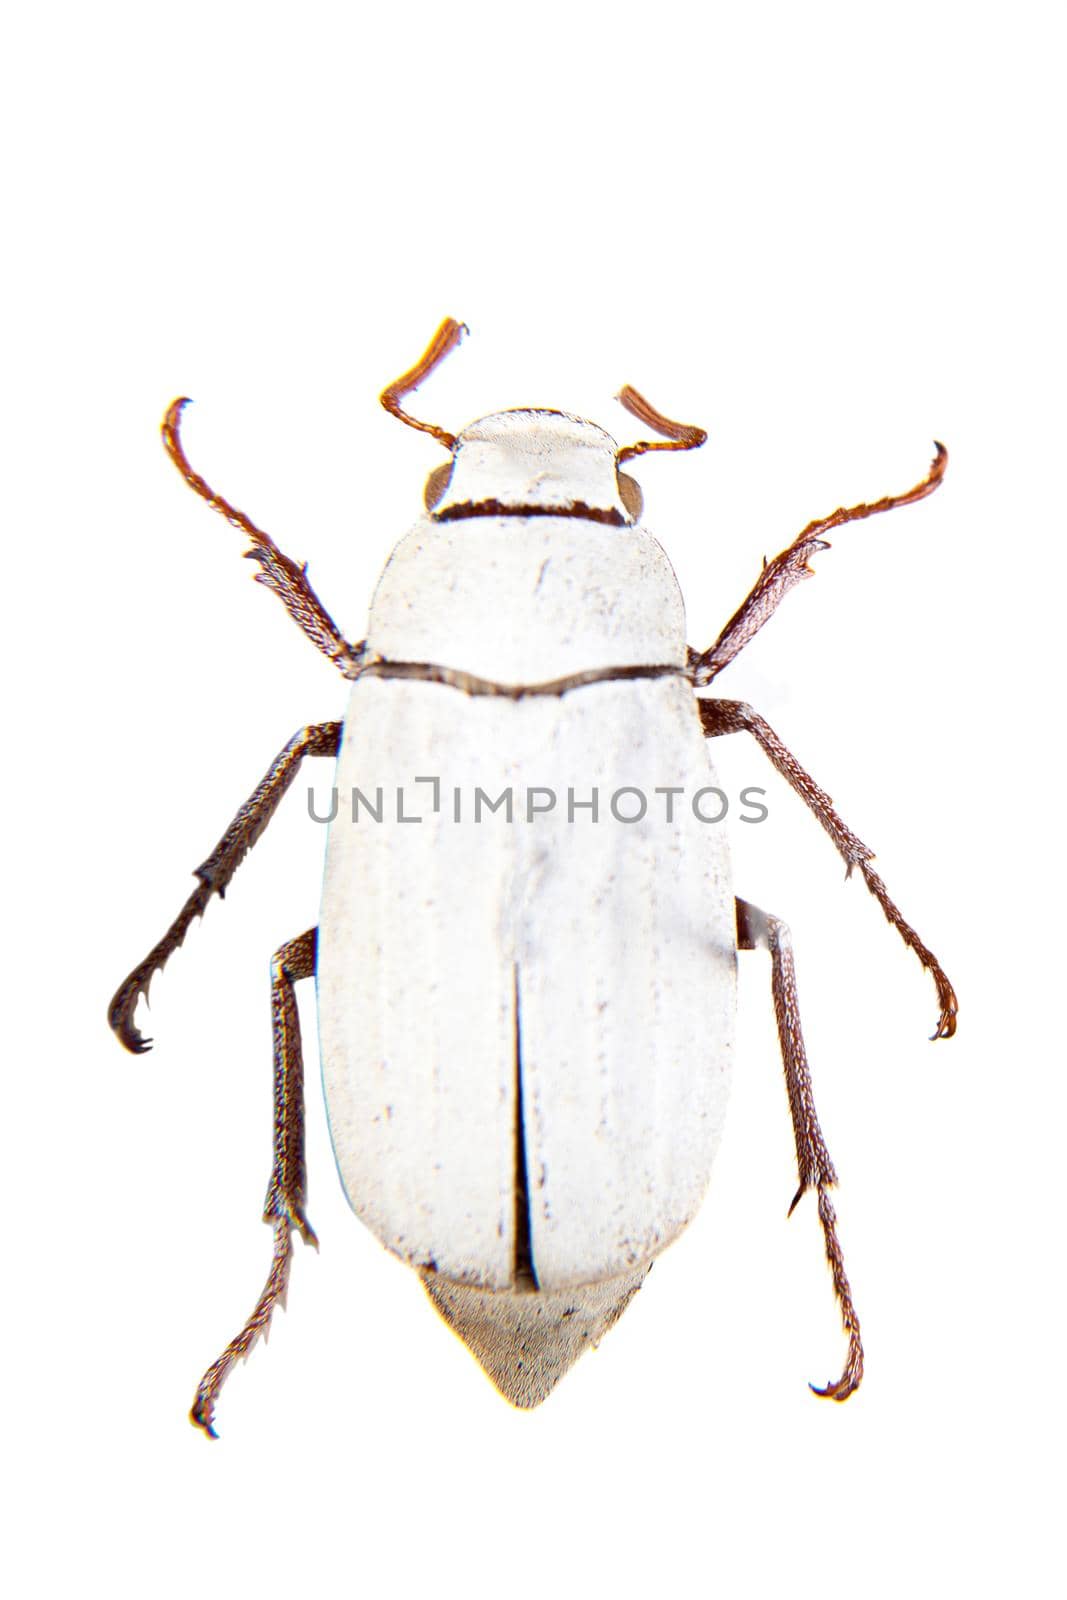 Cockchafe beetle on the white background by RosaJay